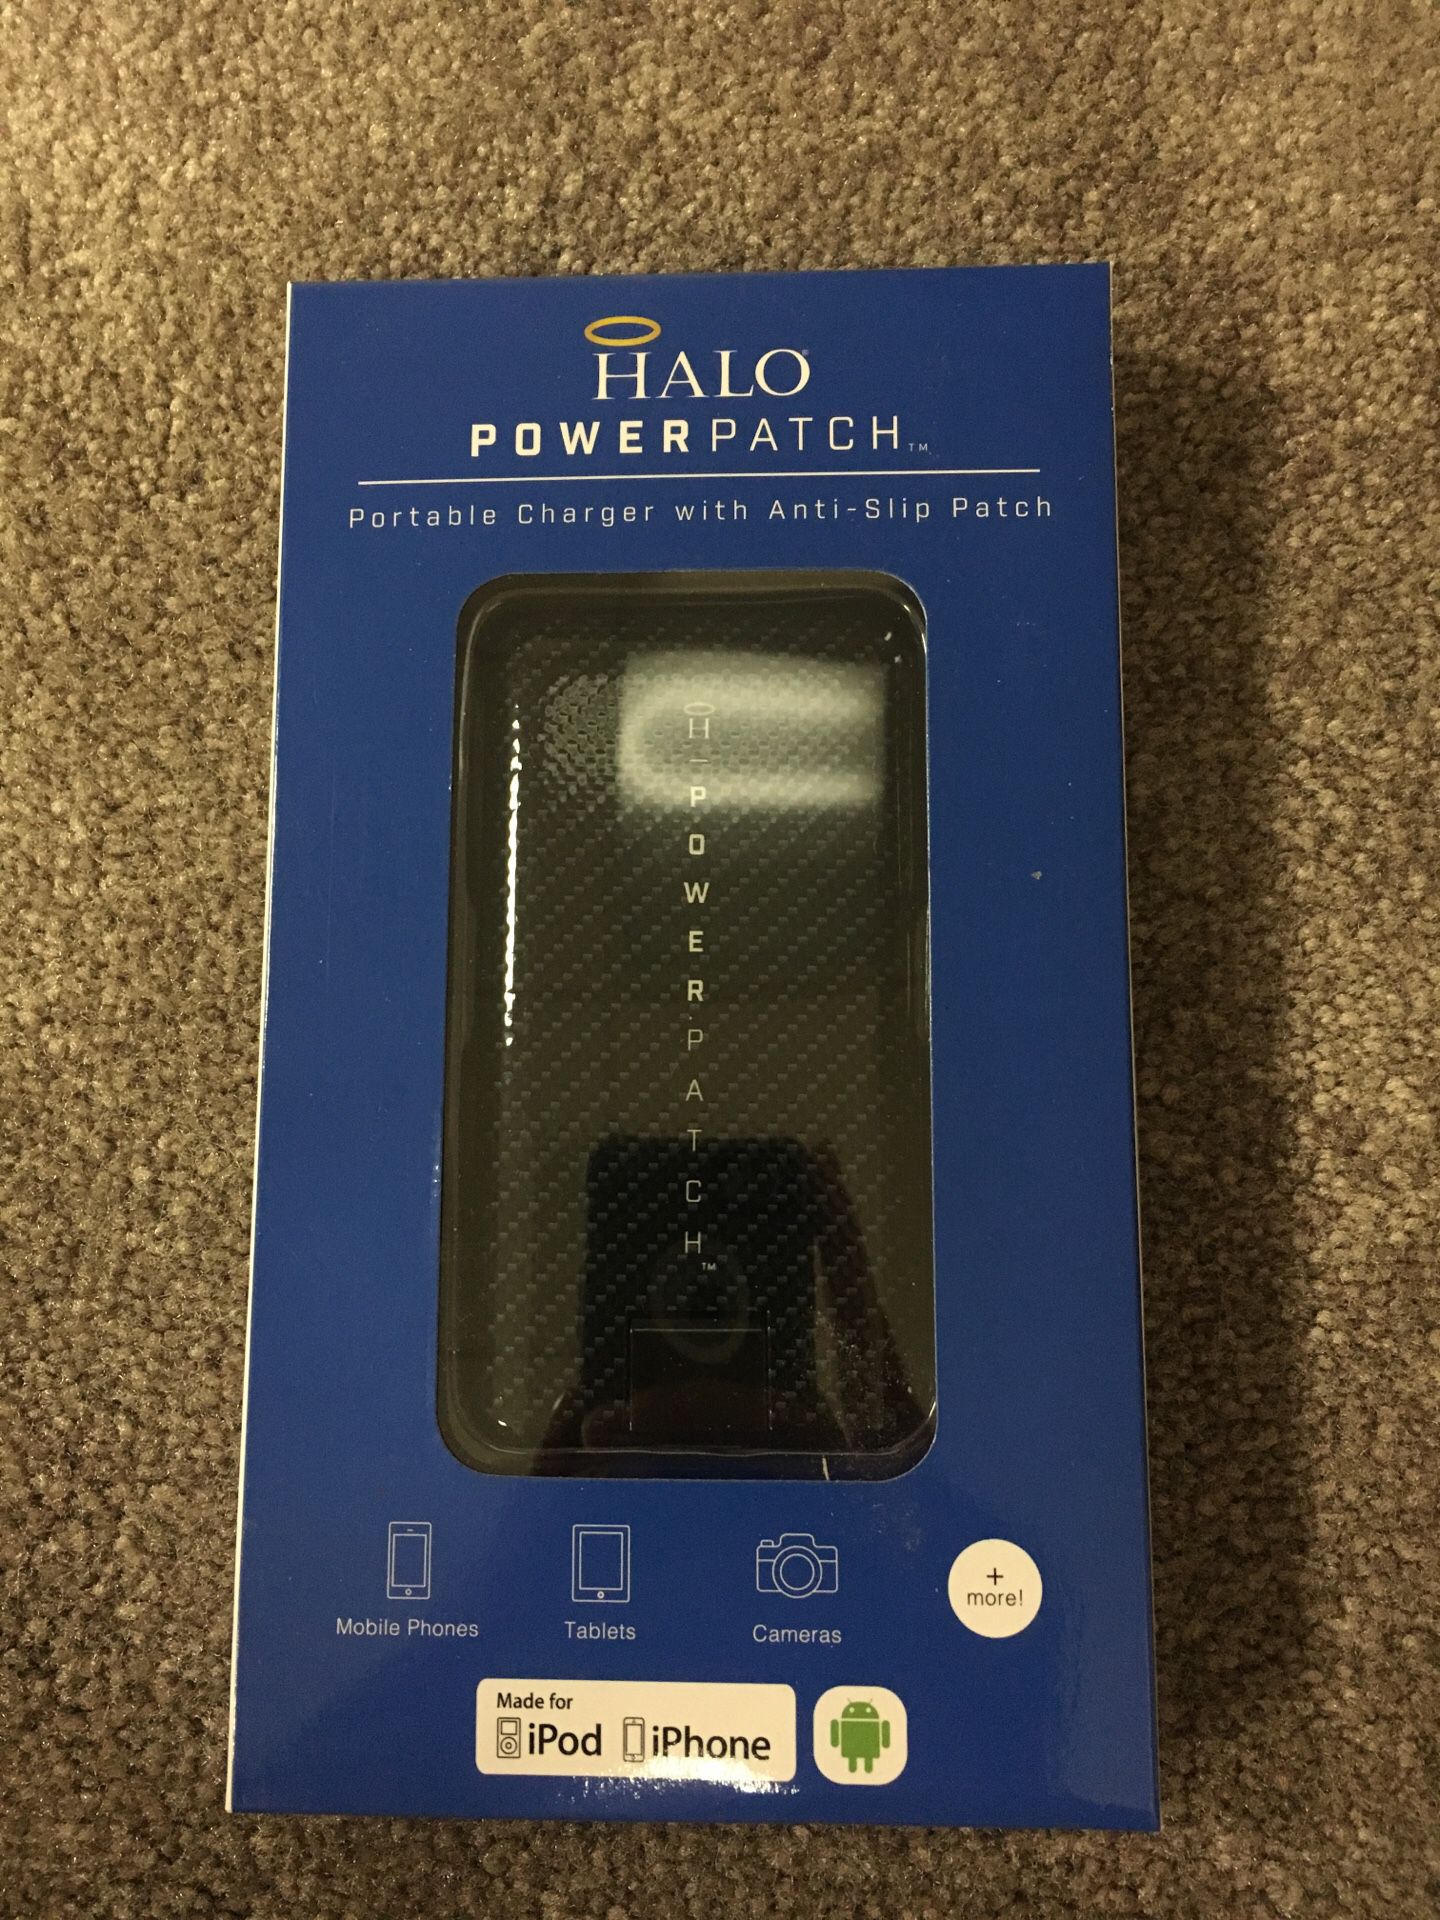 Halo portable charger for iPhone/android